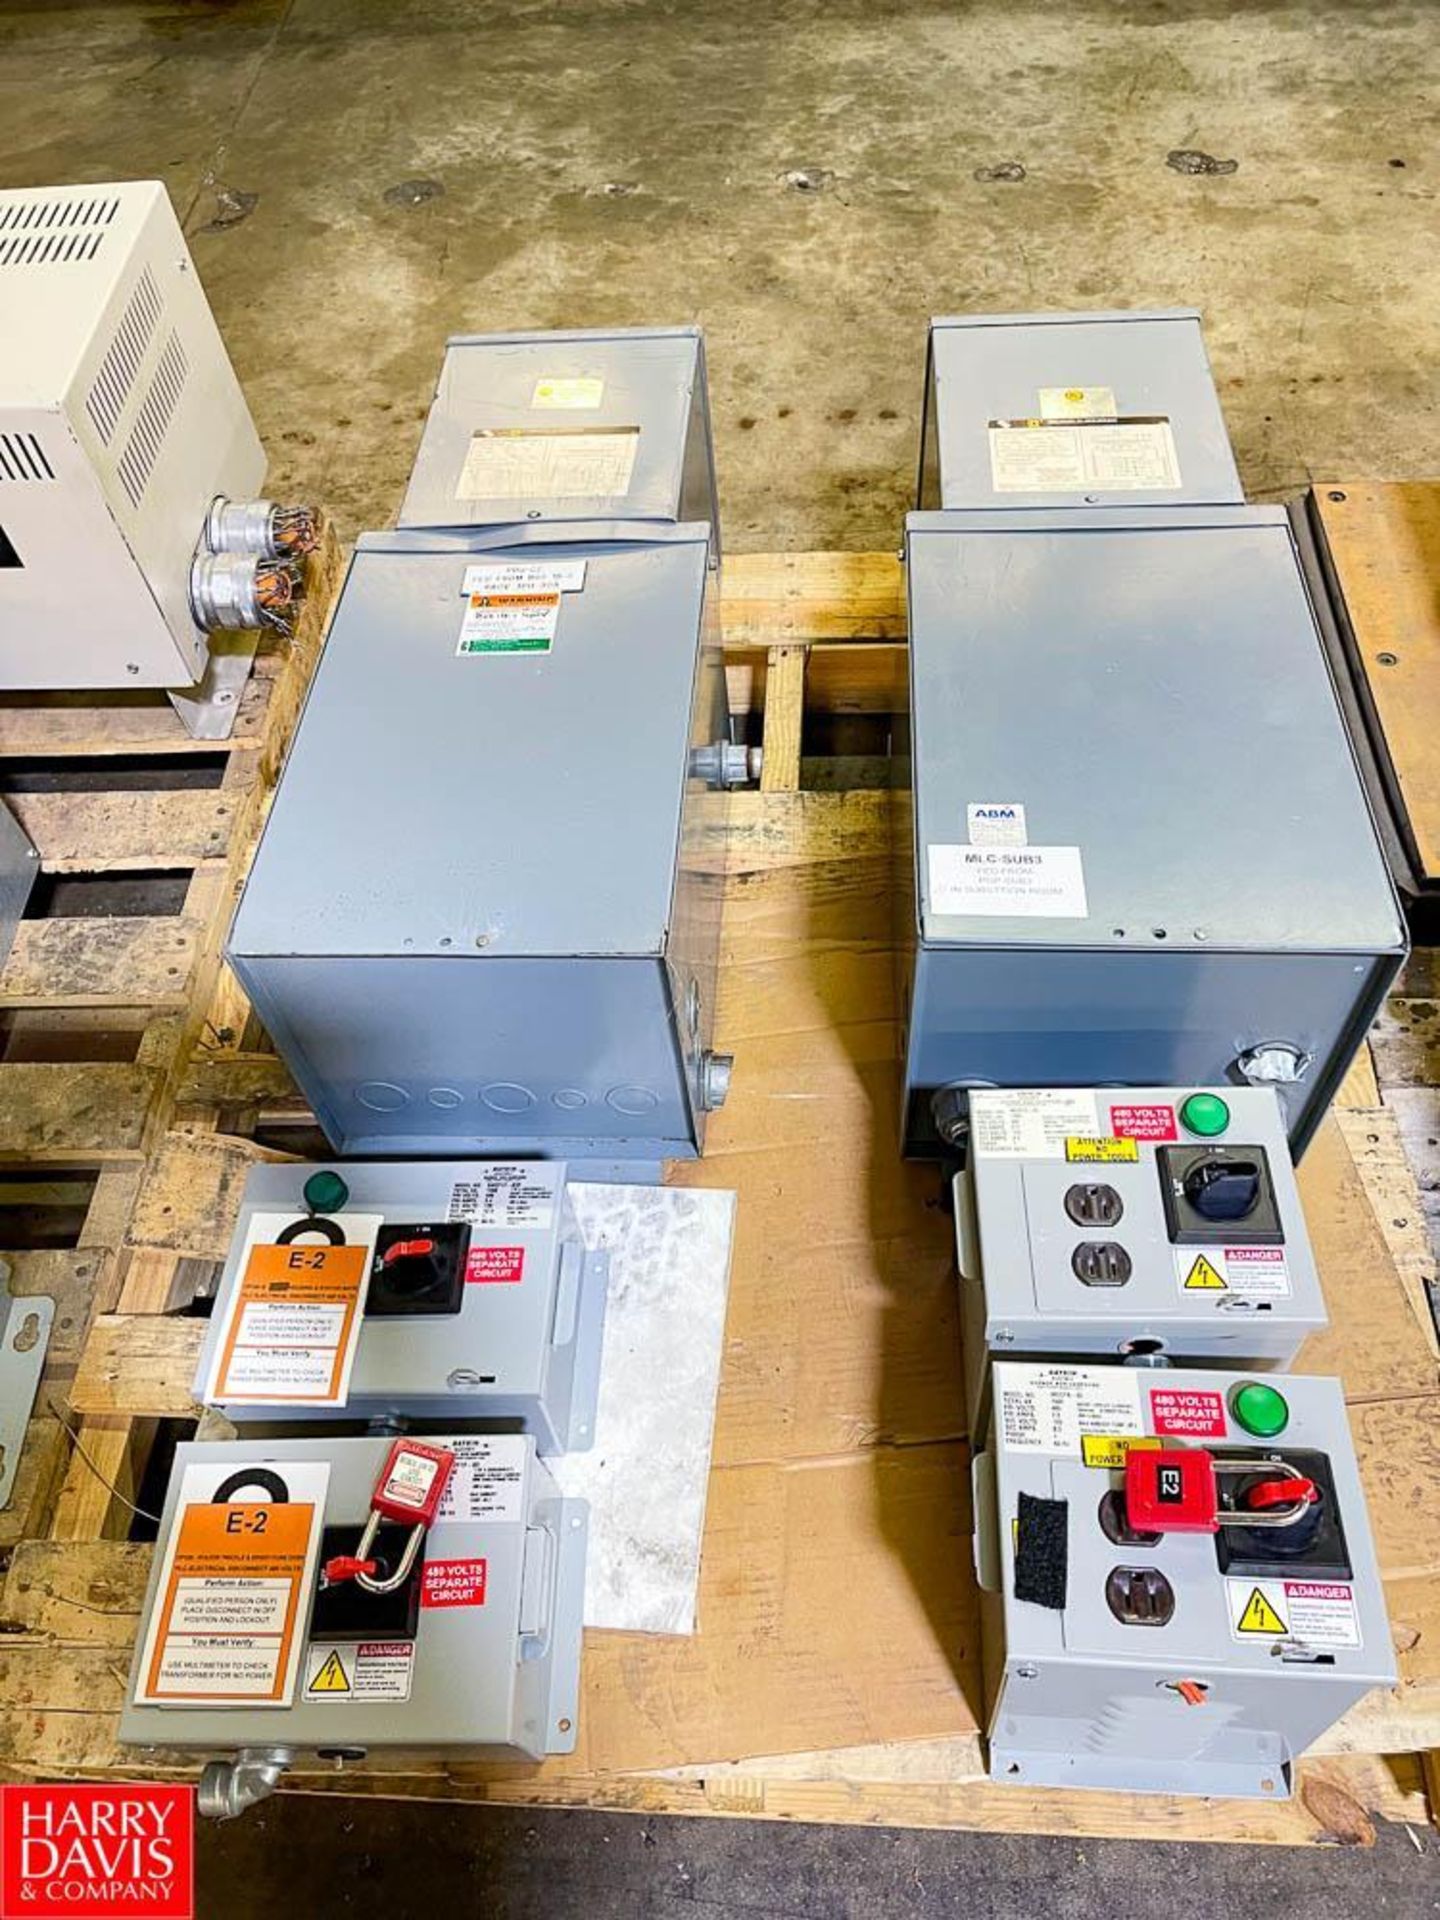 (2) Square D 7.5 kVA 120/480 Volt Transformers, 1-Phase Mini Power Zone with (4) Daykin Disconnects